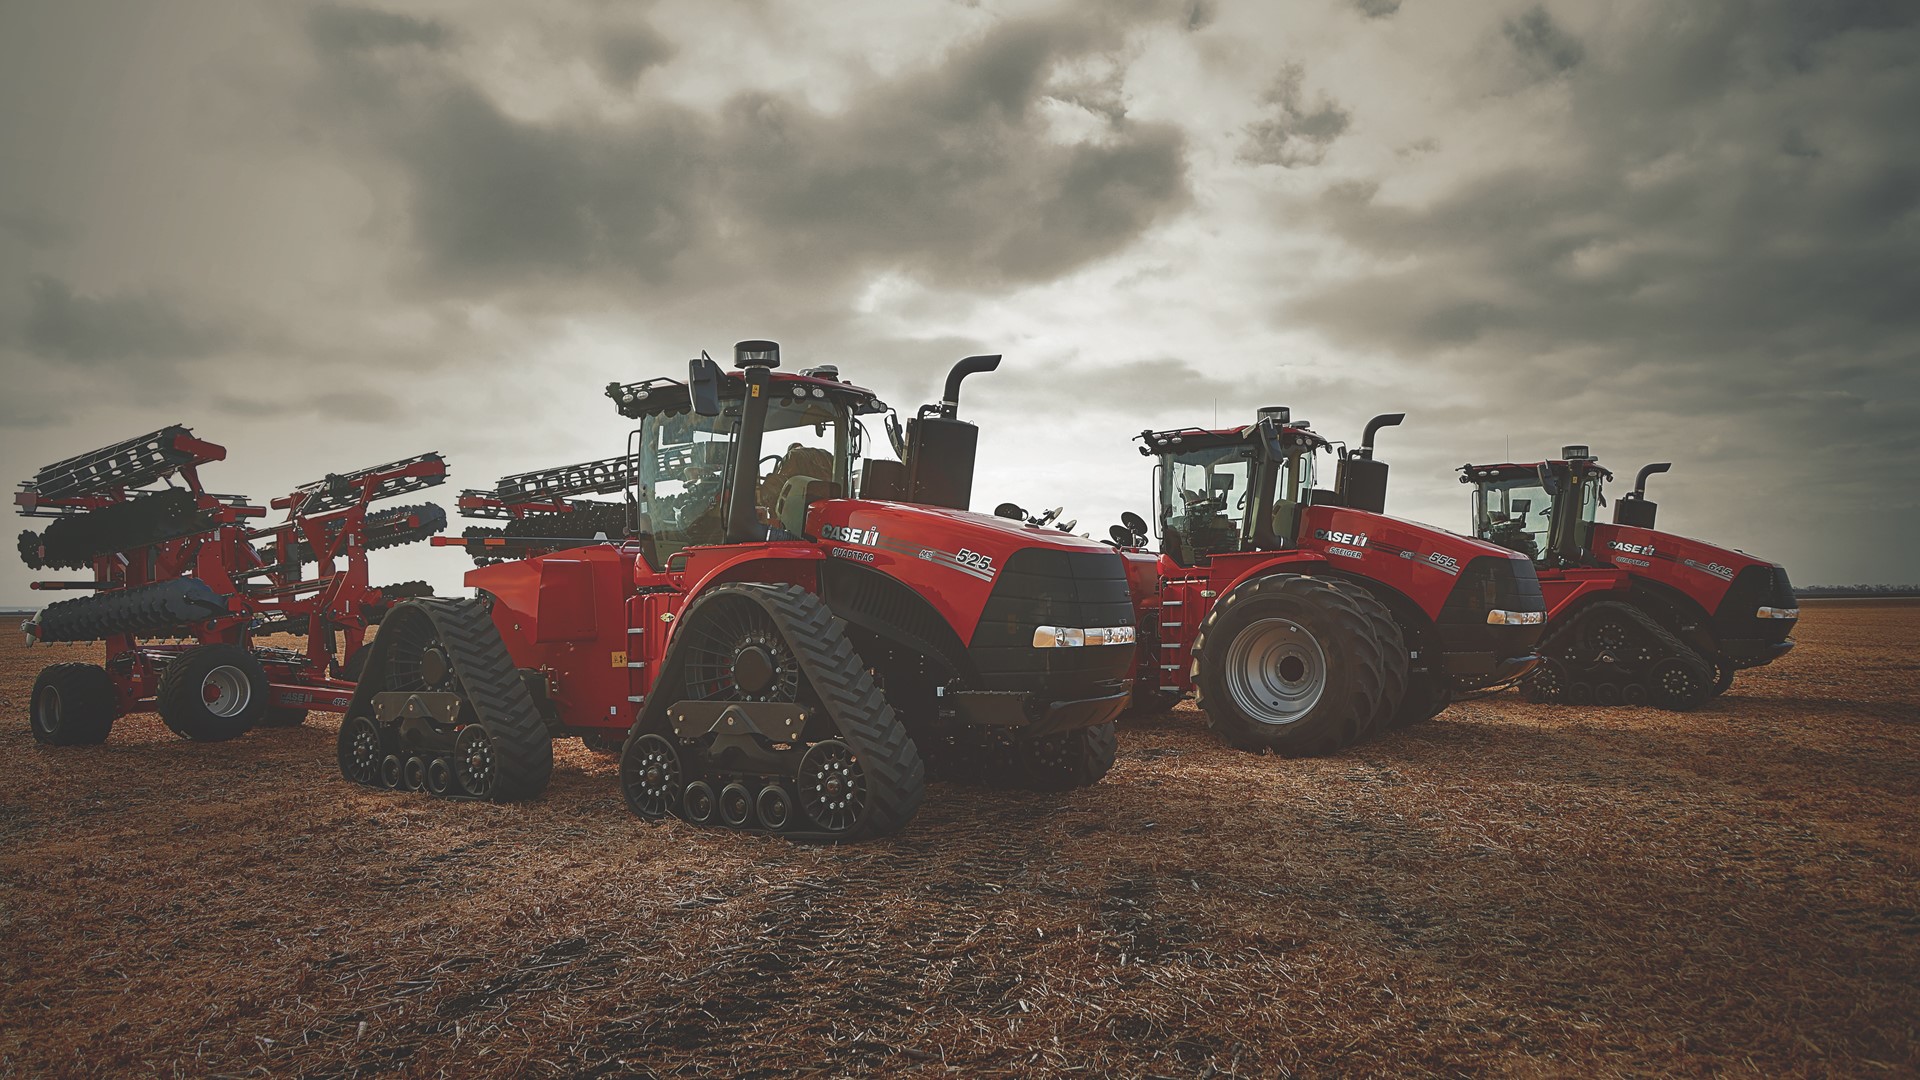 The updated lineup of AFS Connecs Steiger tractors offer greater customization and efficiency than ever before.